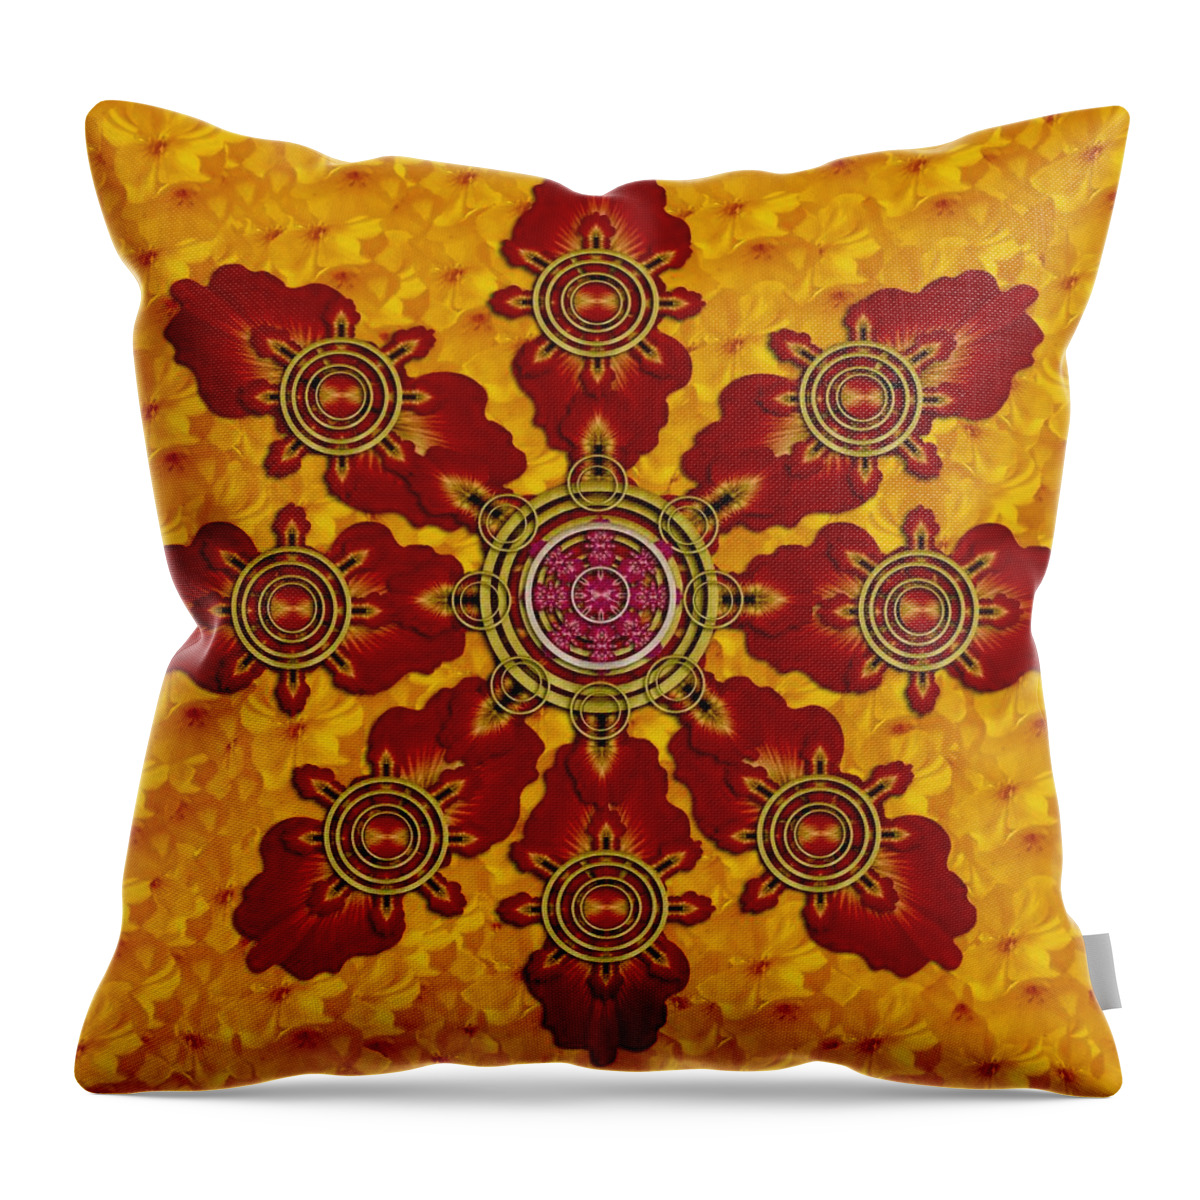 Planet Throw Pillow featuring the mixed media Flower star so flowery over peaceful loved earth by Pepita Selles